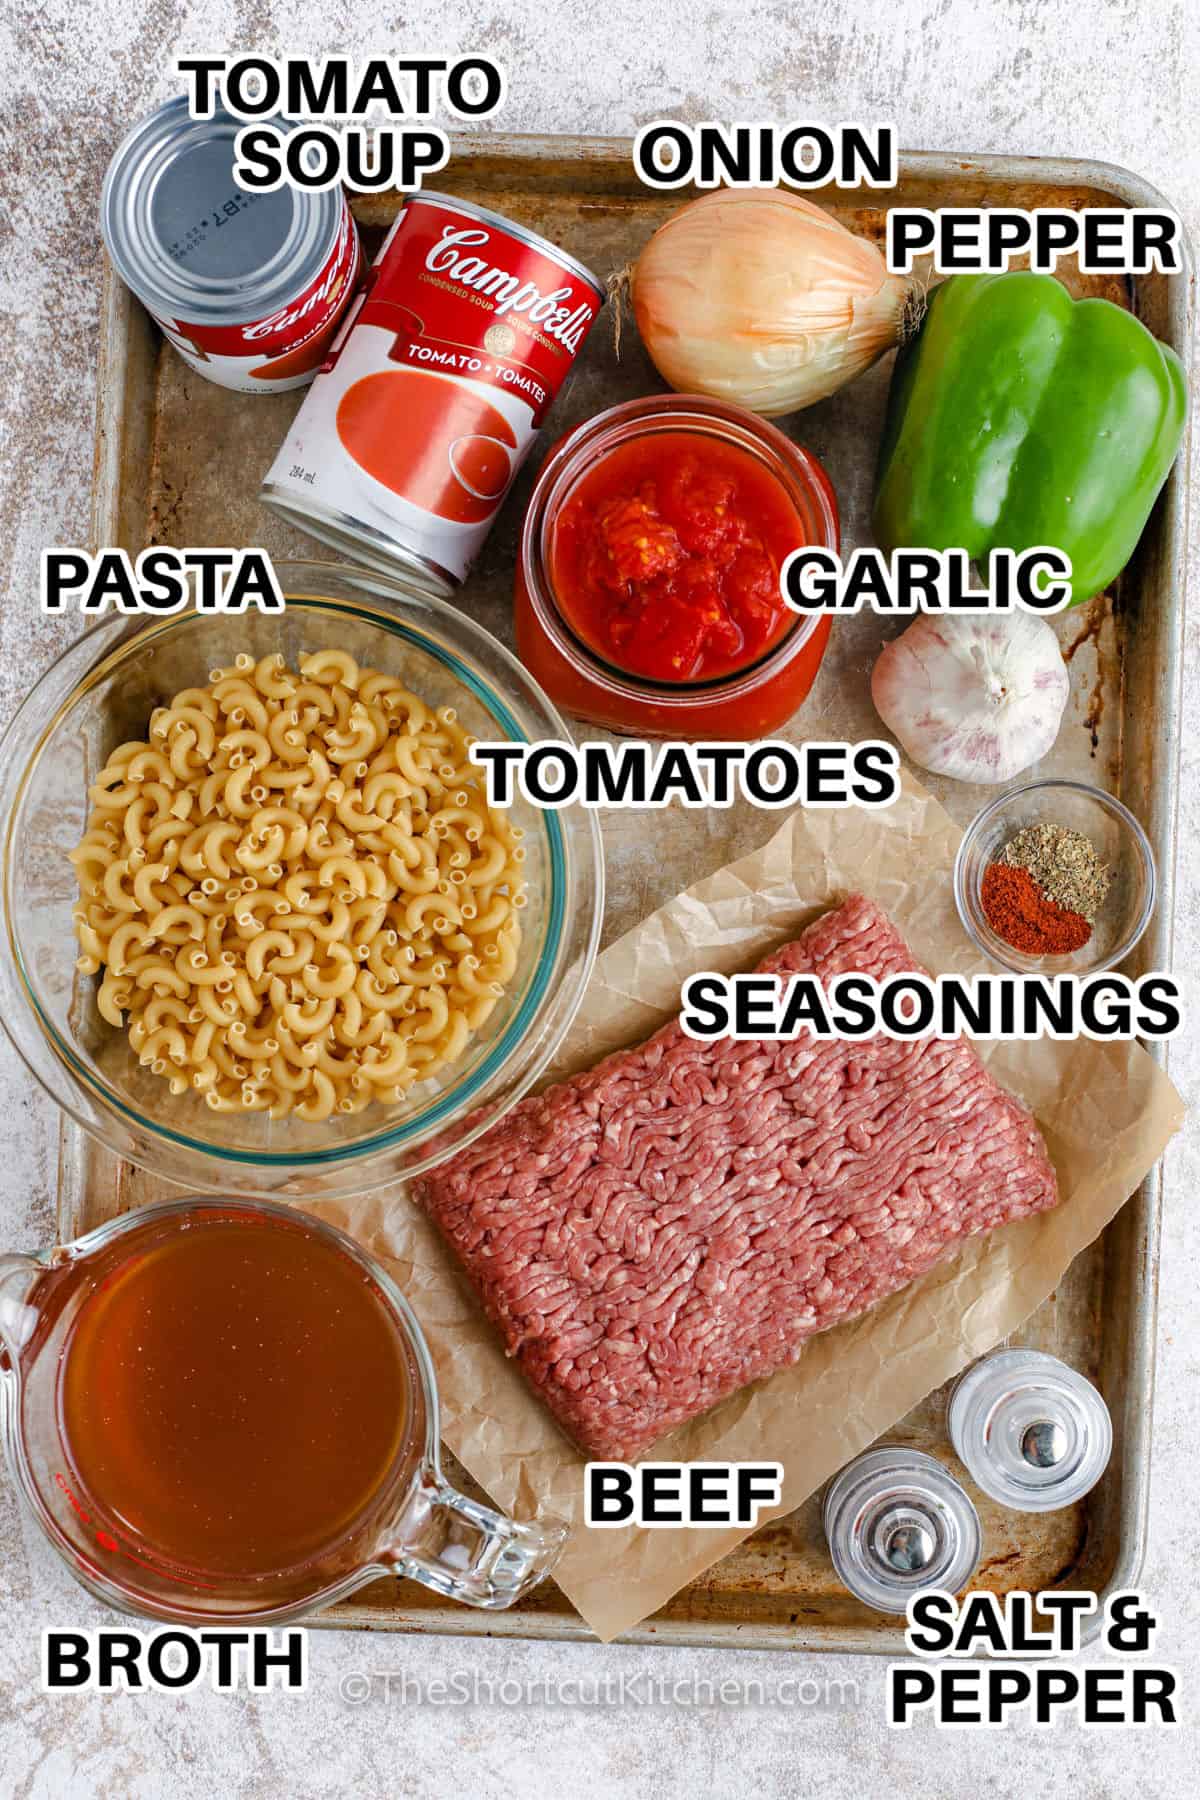 ingredients assembled to make hamburger macaroni soup including tomato soup, onion, pepper, pasta, tomatoes, seasoning, ground beef, broth, and salt and pepper